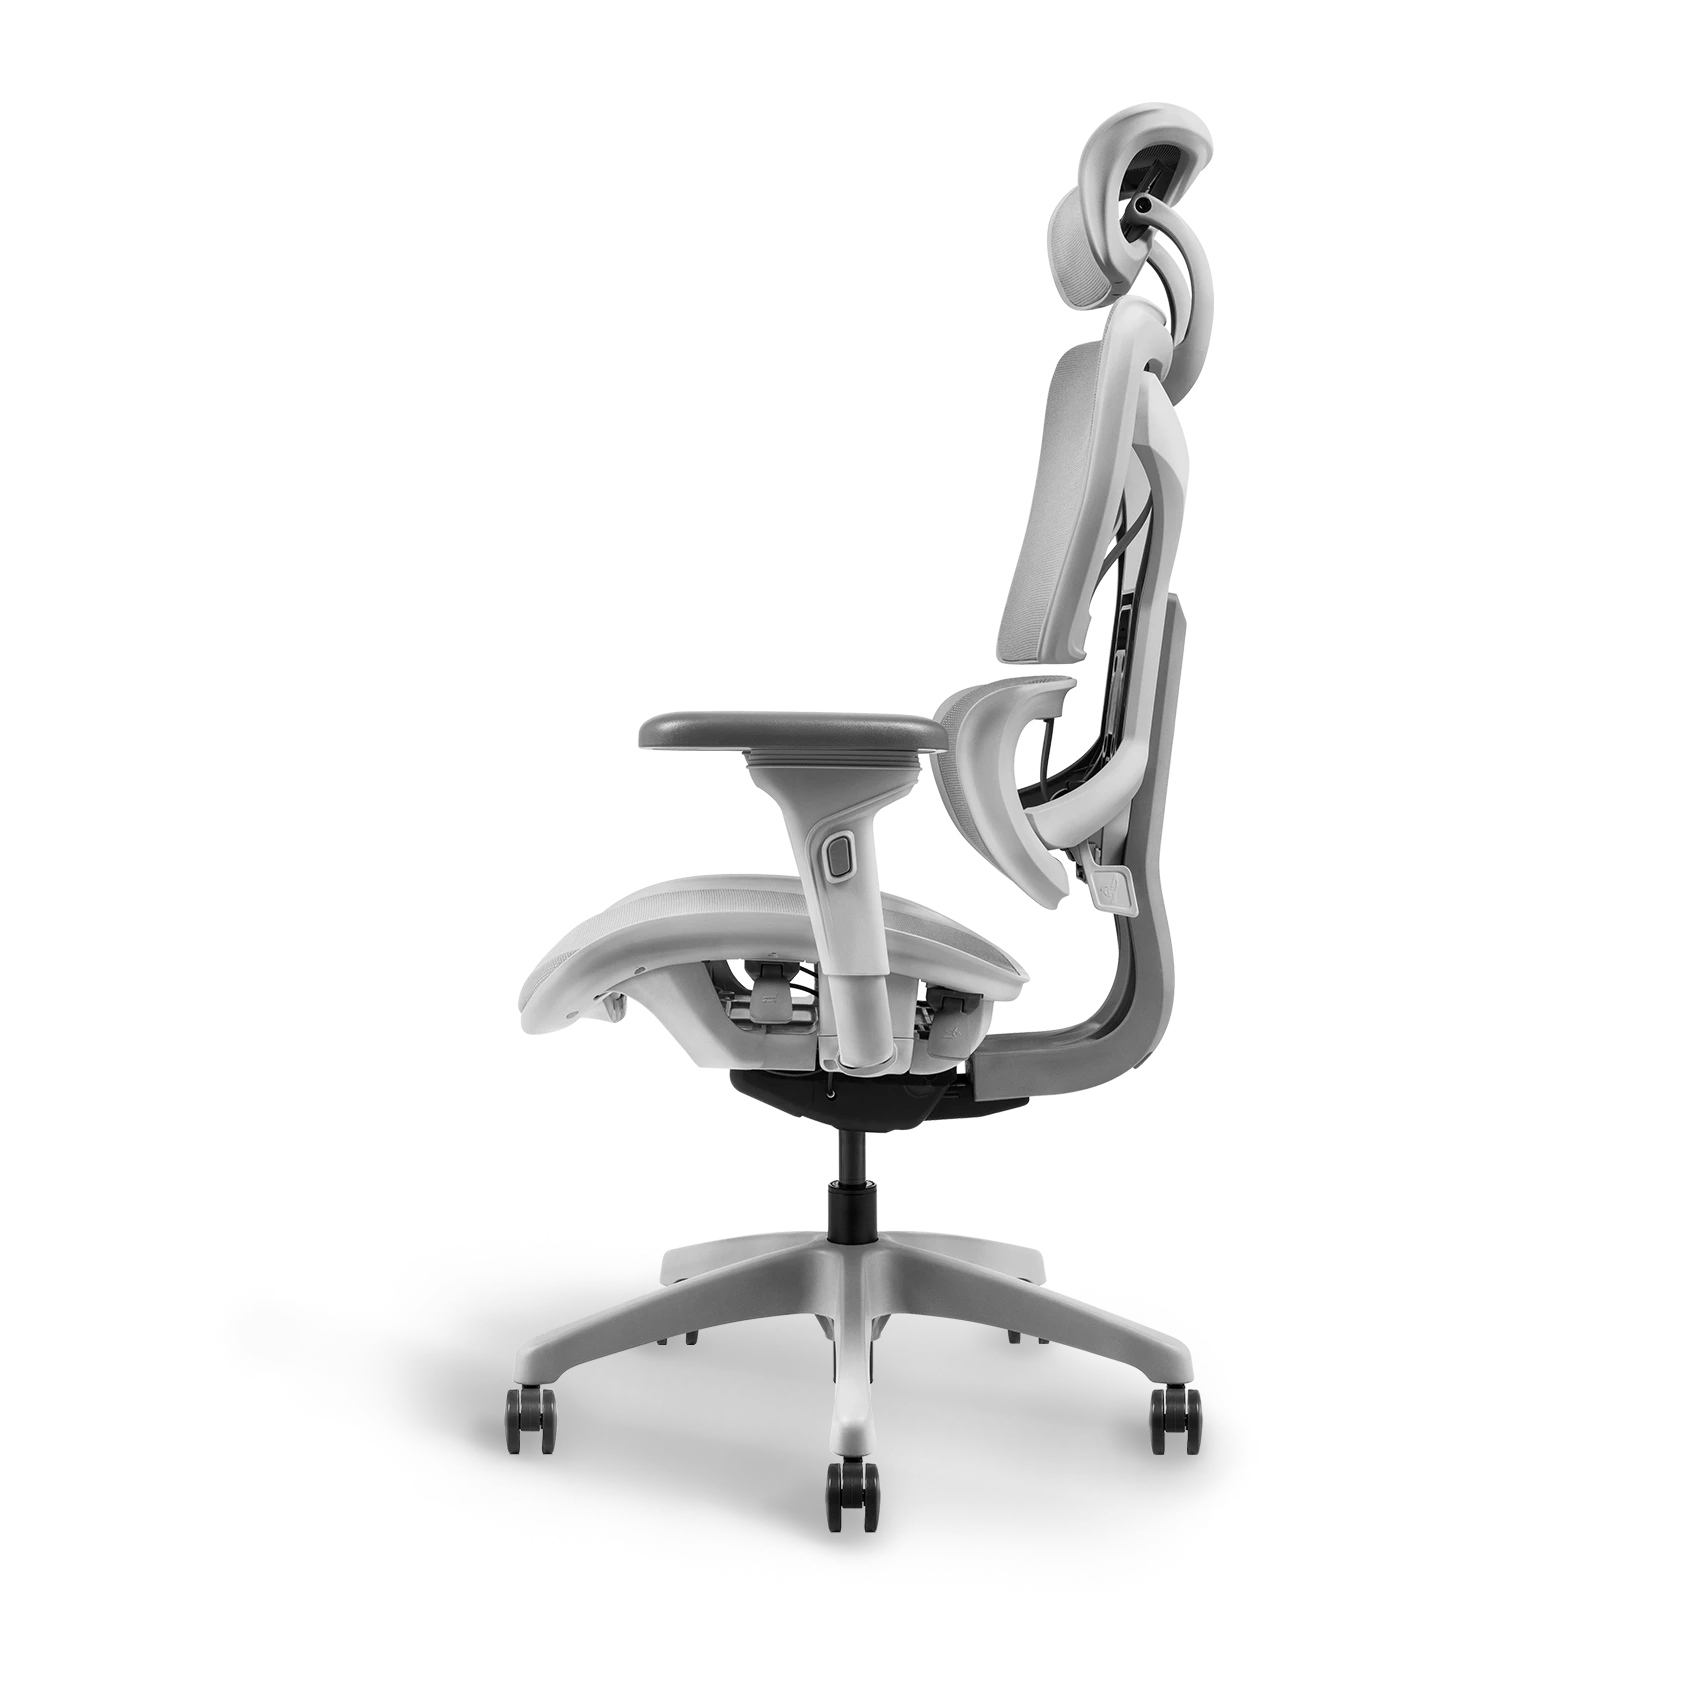 Angled view of Ayla Ergonomic Chair Grey with detailed view of the seat depth adjustment and armrest customization features.